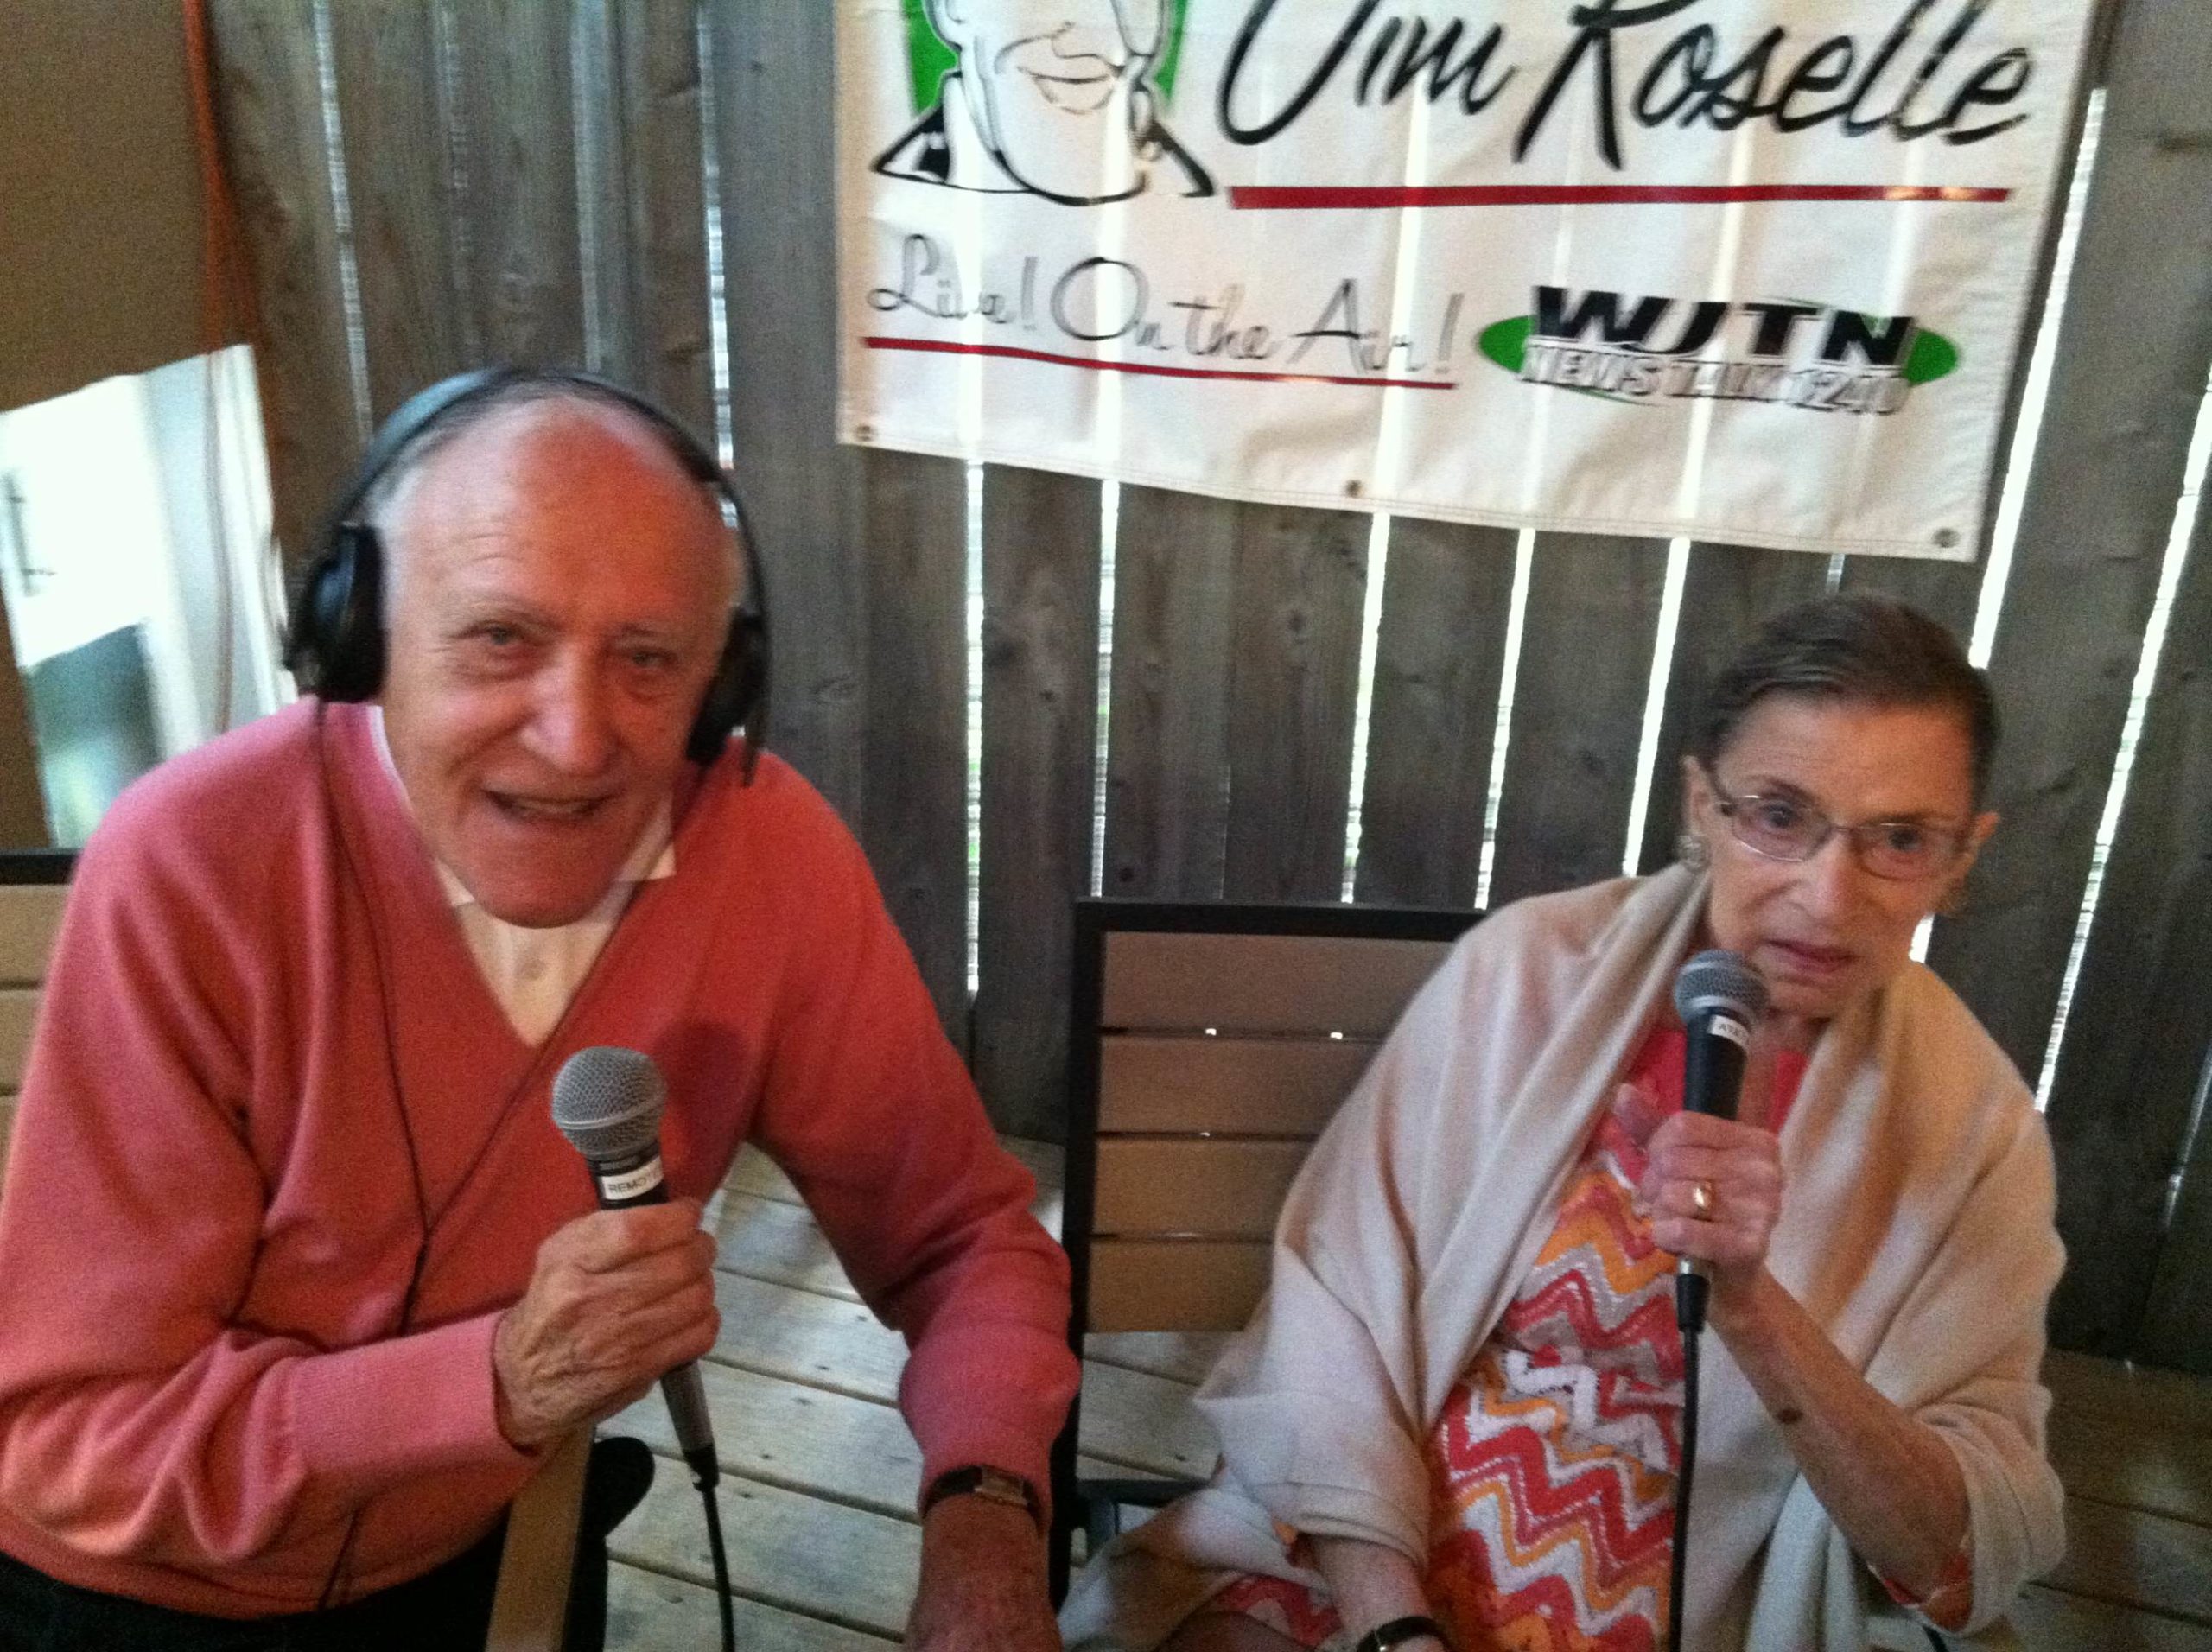 Supreme Court Justice Ruth Bader Ginsburg and Jim Roselle, AM 1210, WJTN Jamestown, NY